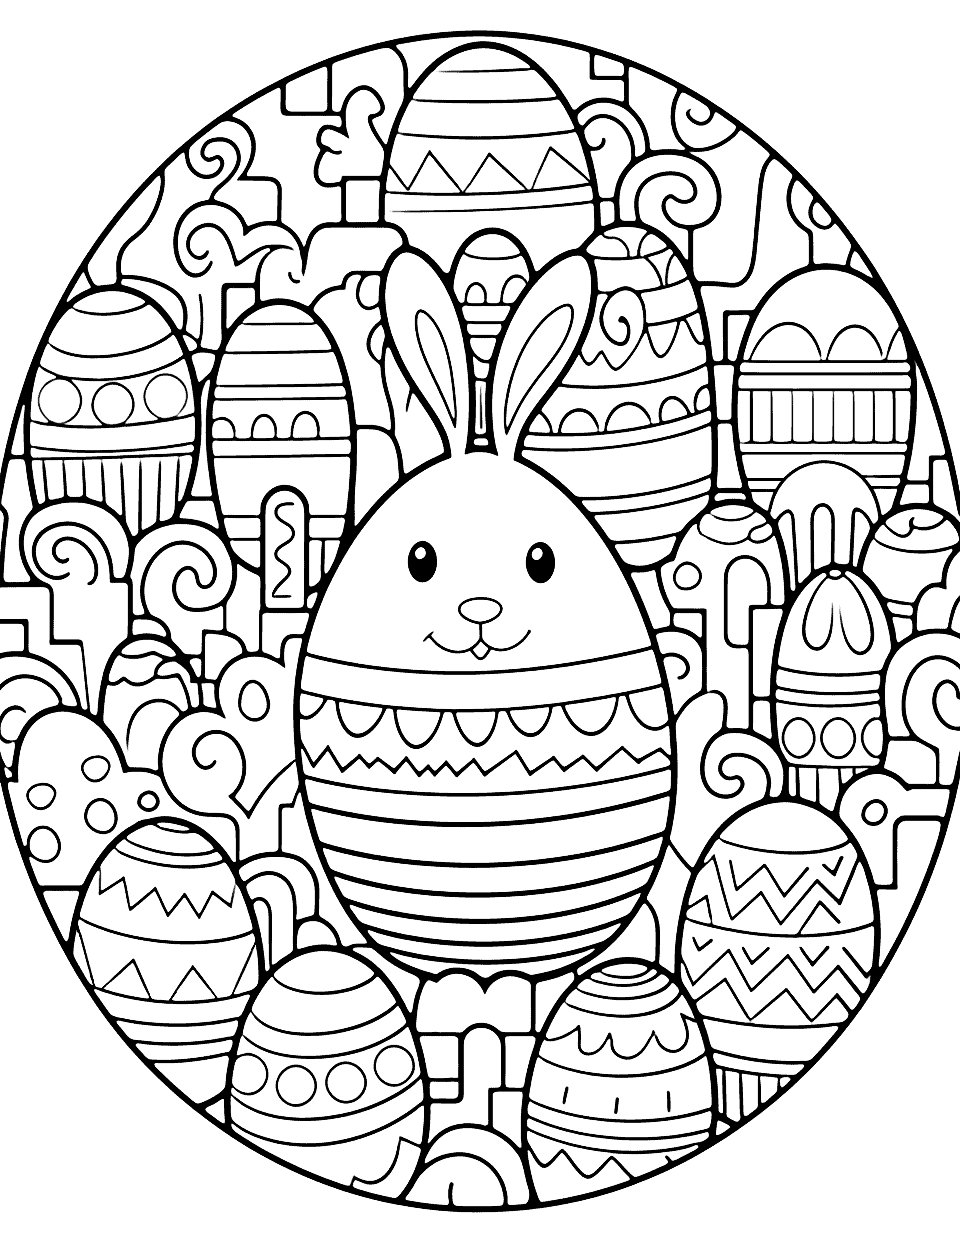 Fun Easter Egg Coloring Page - An egg-shaped maze with Easter-themed elements for kids to color.